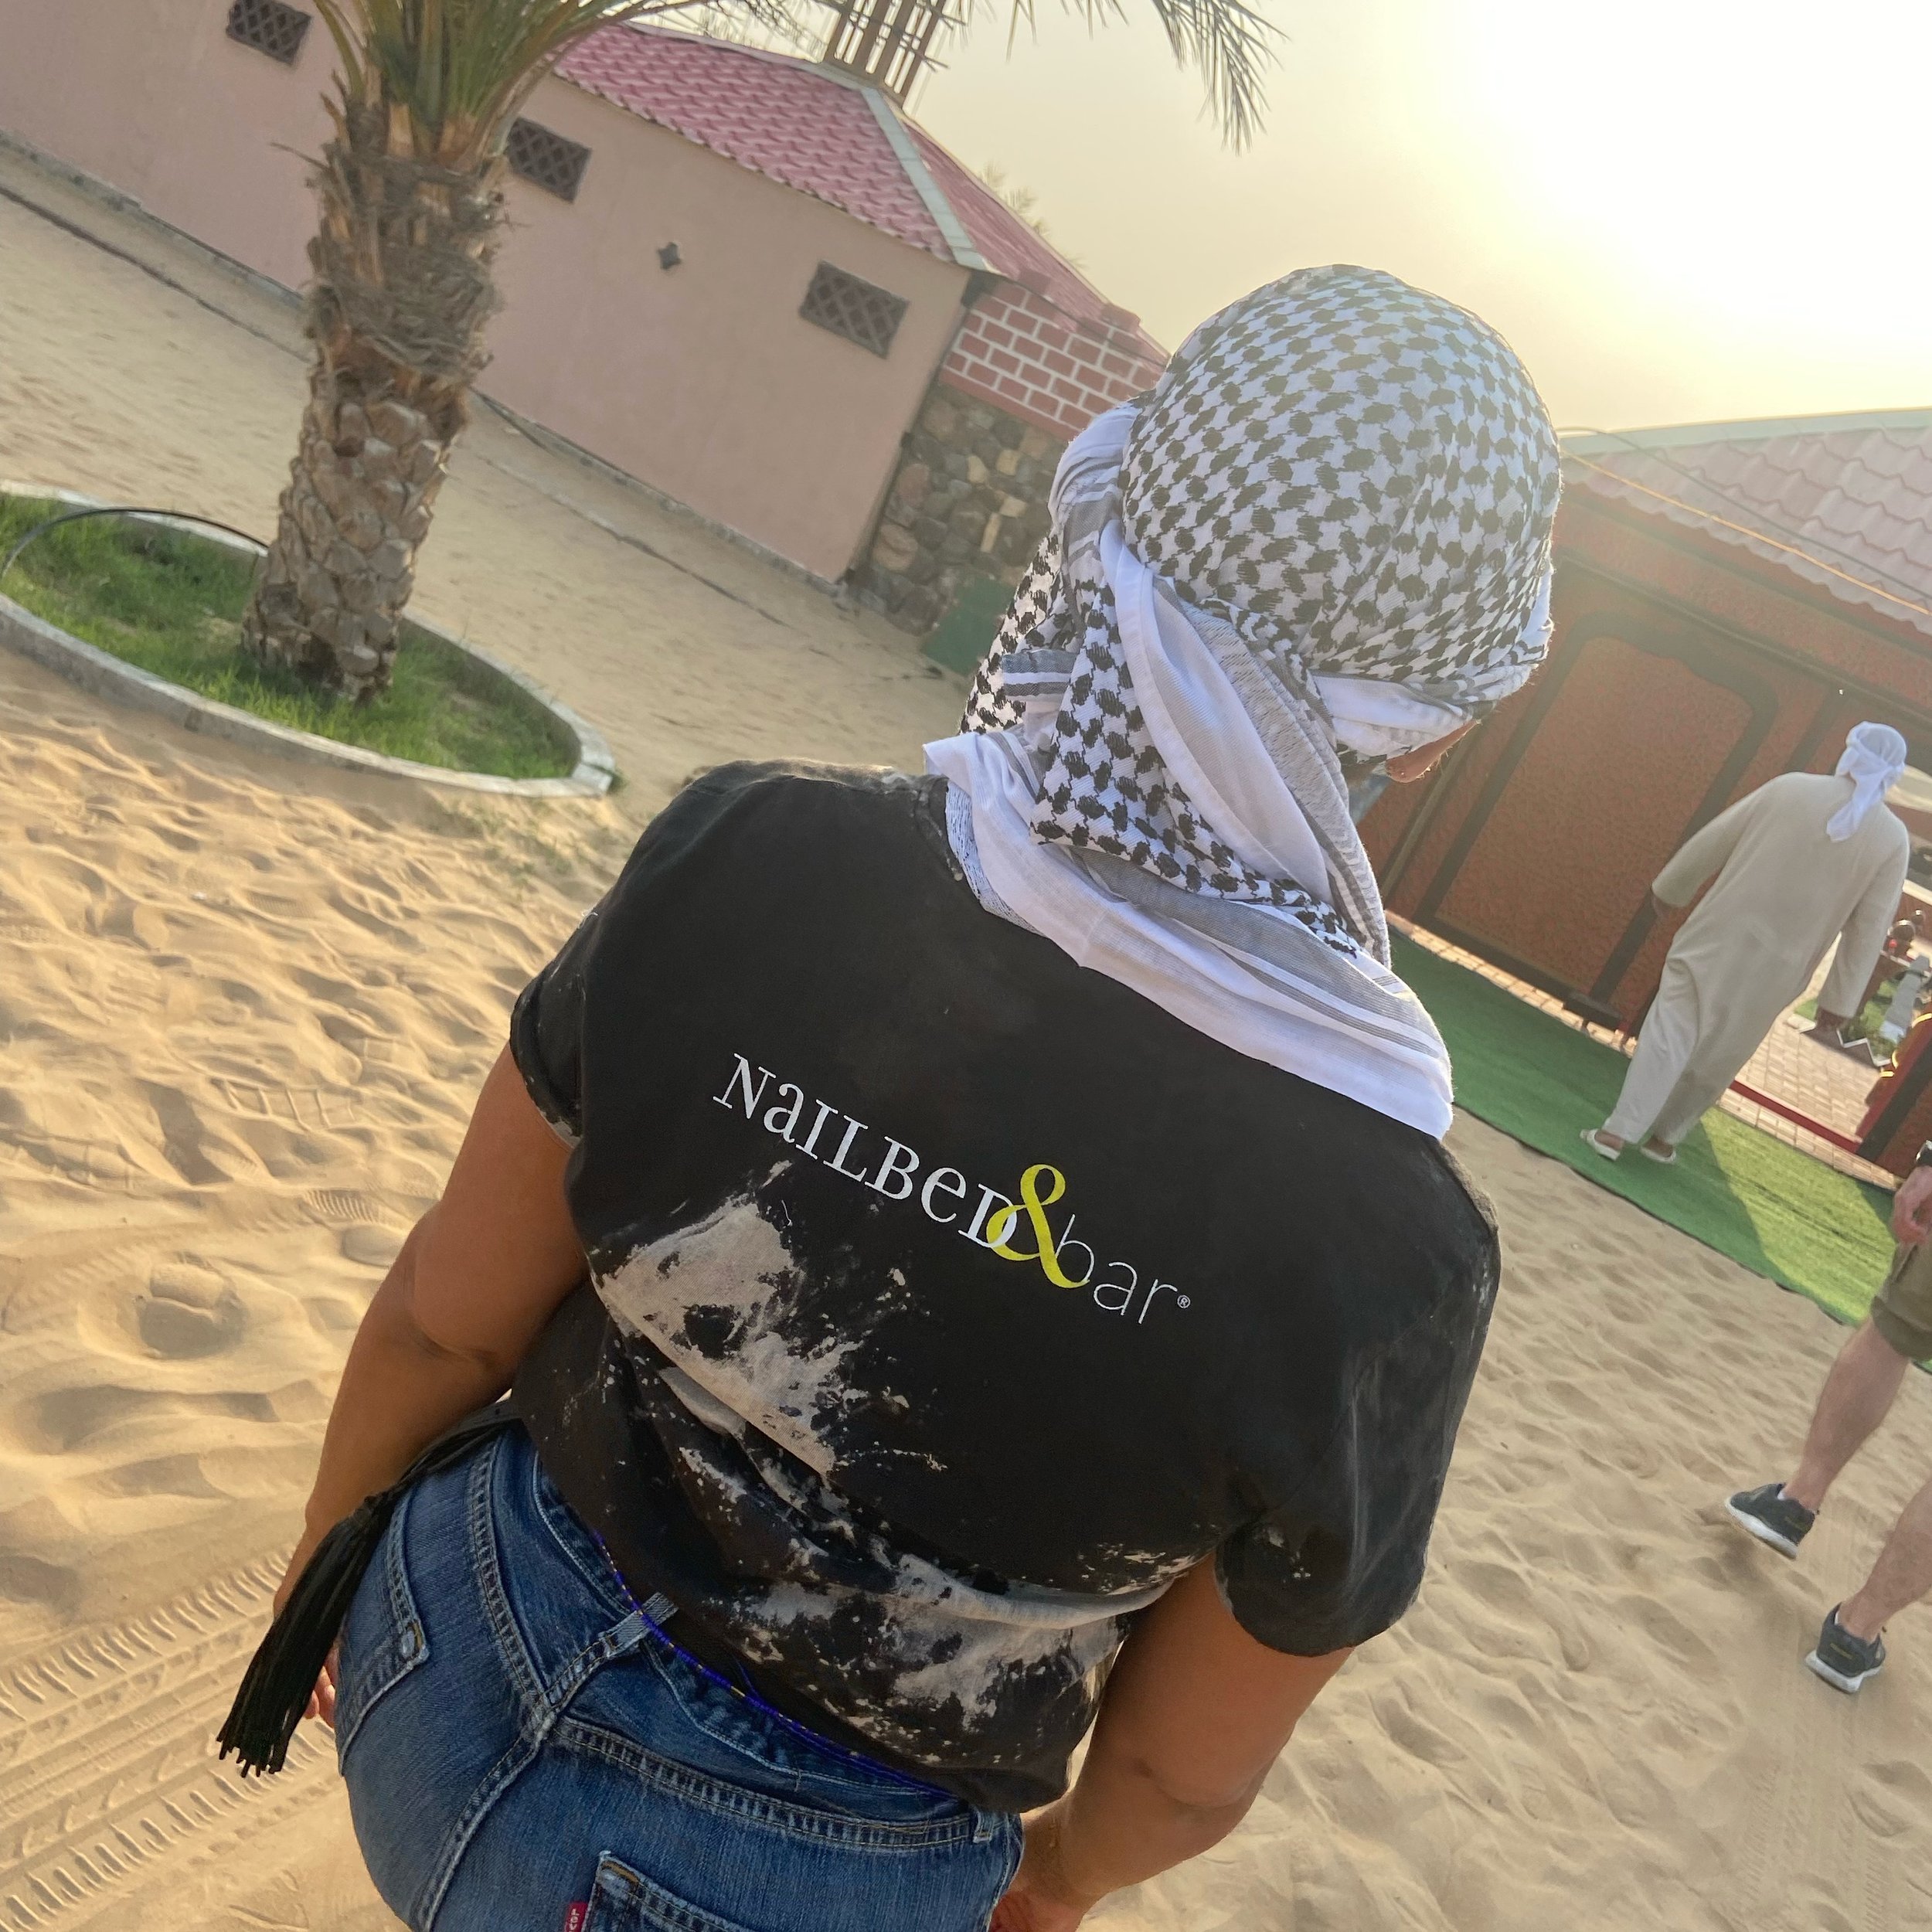 Are you packed? White tee&rsquo;s on sale NOW! In-salon only. It&rsquo;s the perfect tee for your vacation. Don&rsquo;t forget your socks, especially if you&rsquo;ll spend some time in the desert. #dubai #nailbedbar